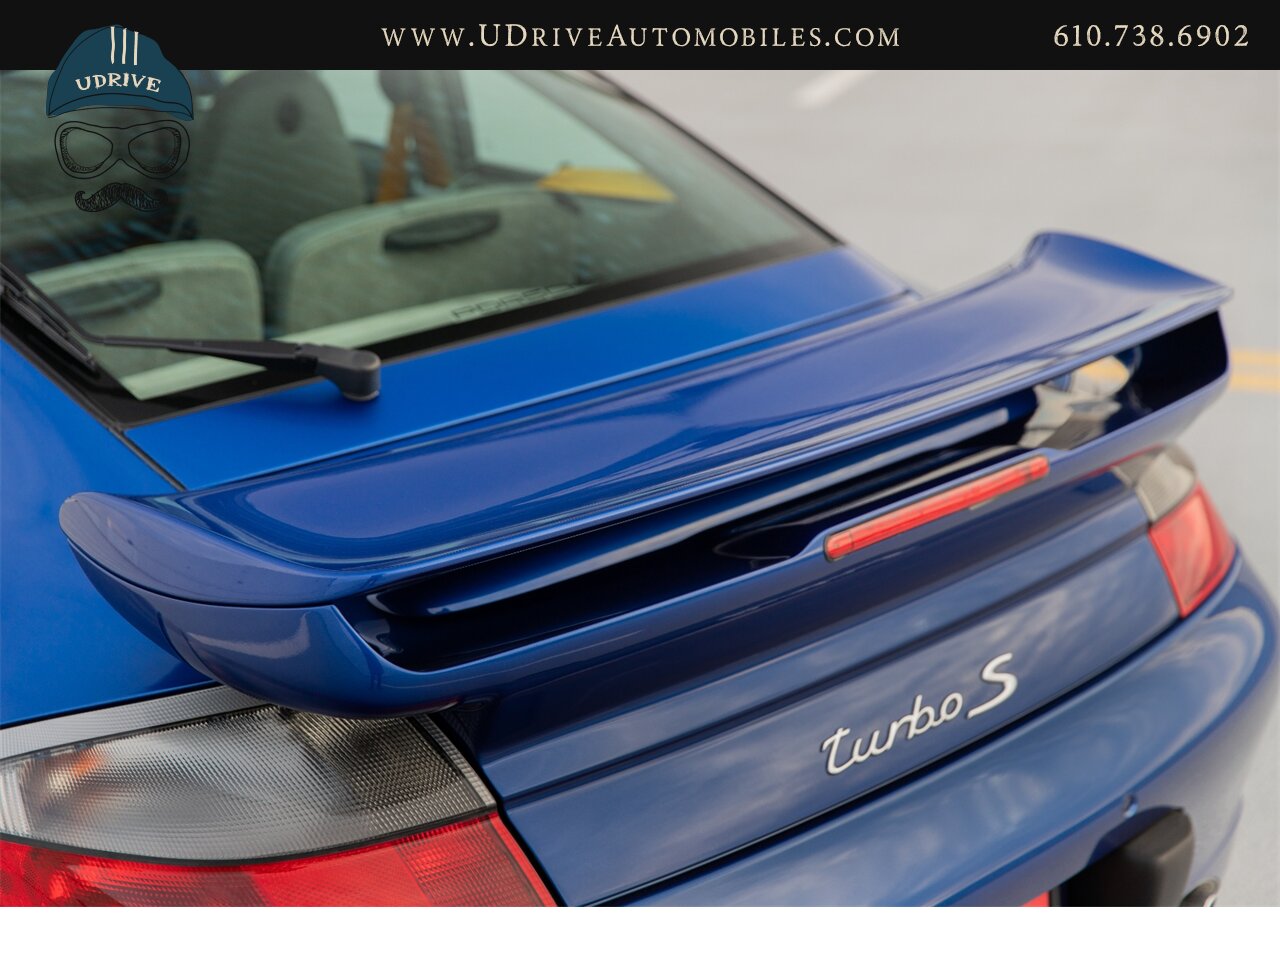 2005 Porsche 911 Turbo S Factory Aerokit Extremely Rare Cobalt Blue  Yellow Deviating Stitching 1 of a Kind Spec $160k MSRP - Photo 26 - West Chester, PA 19382